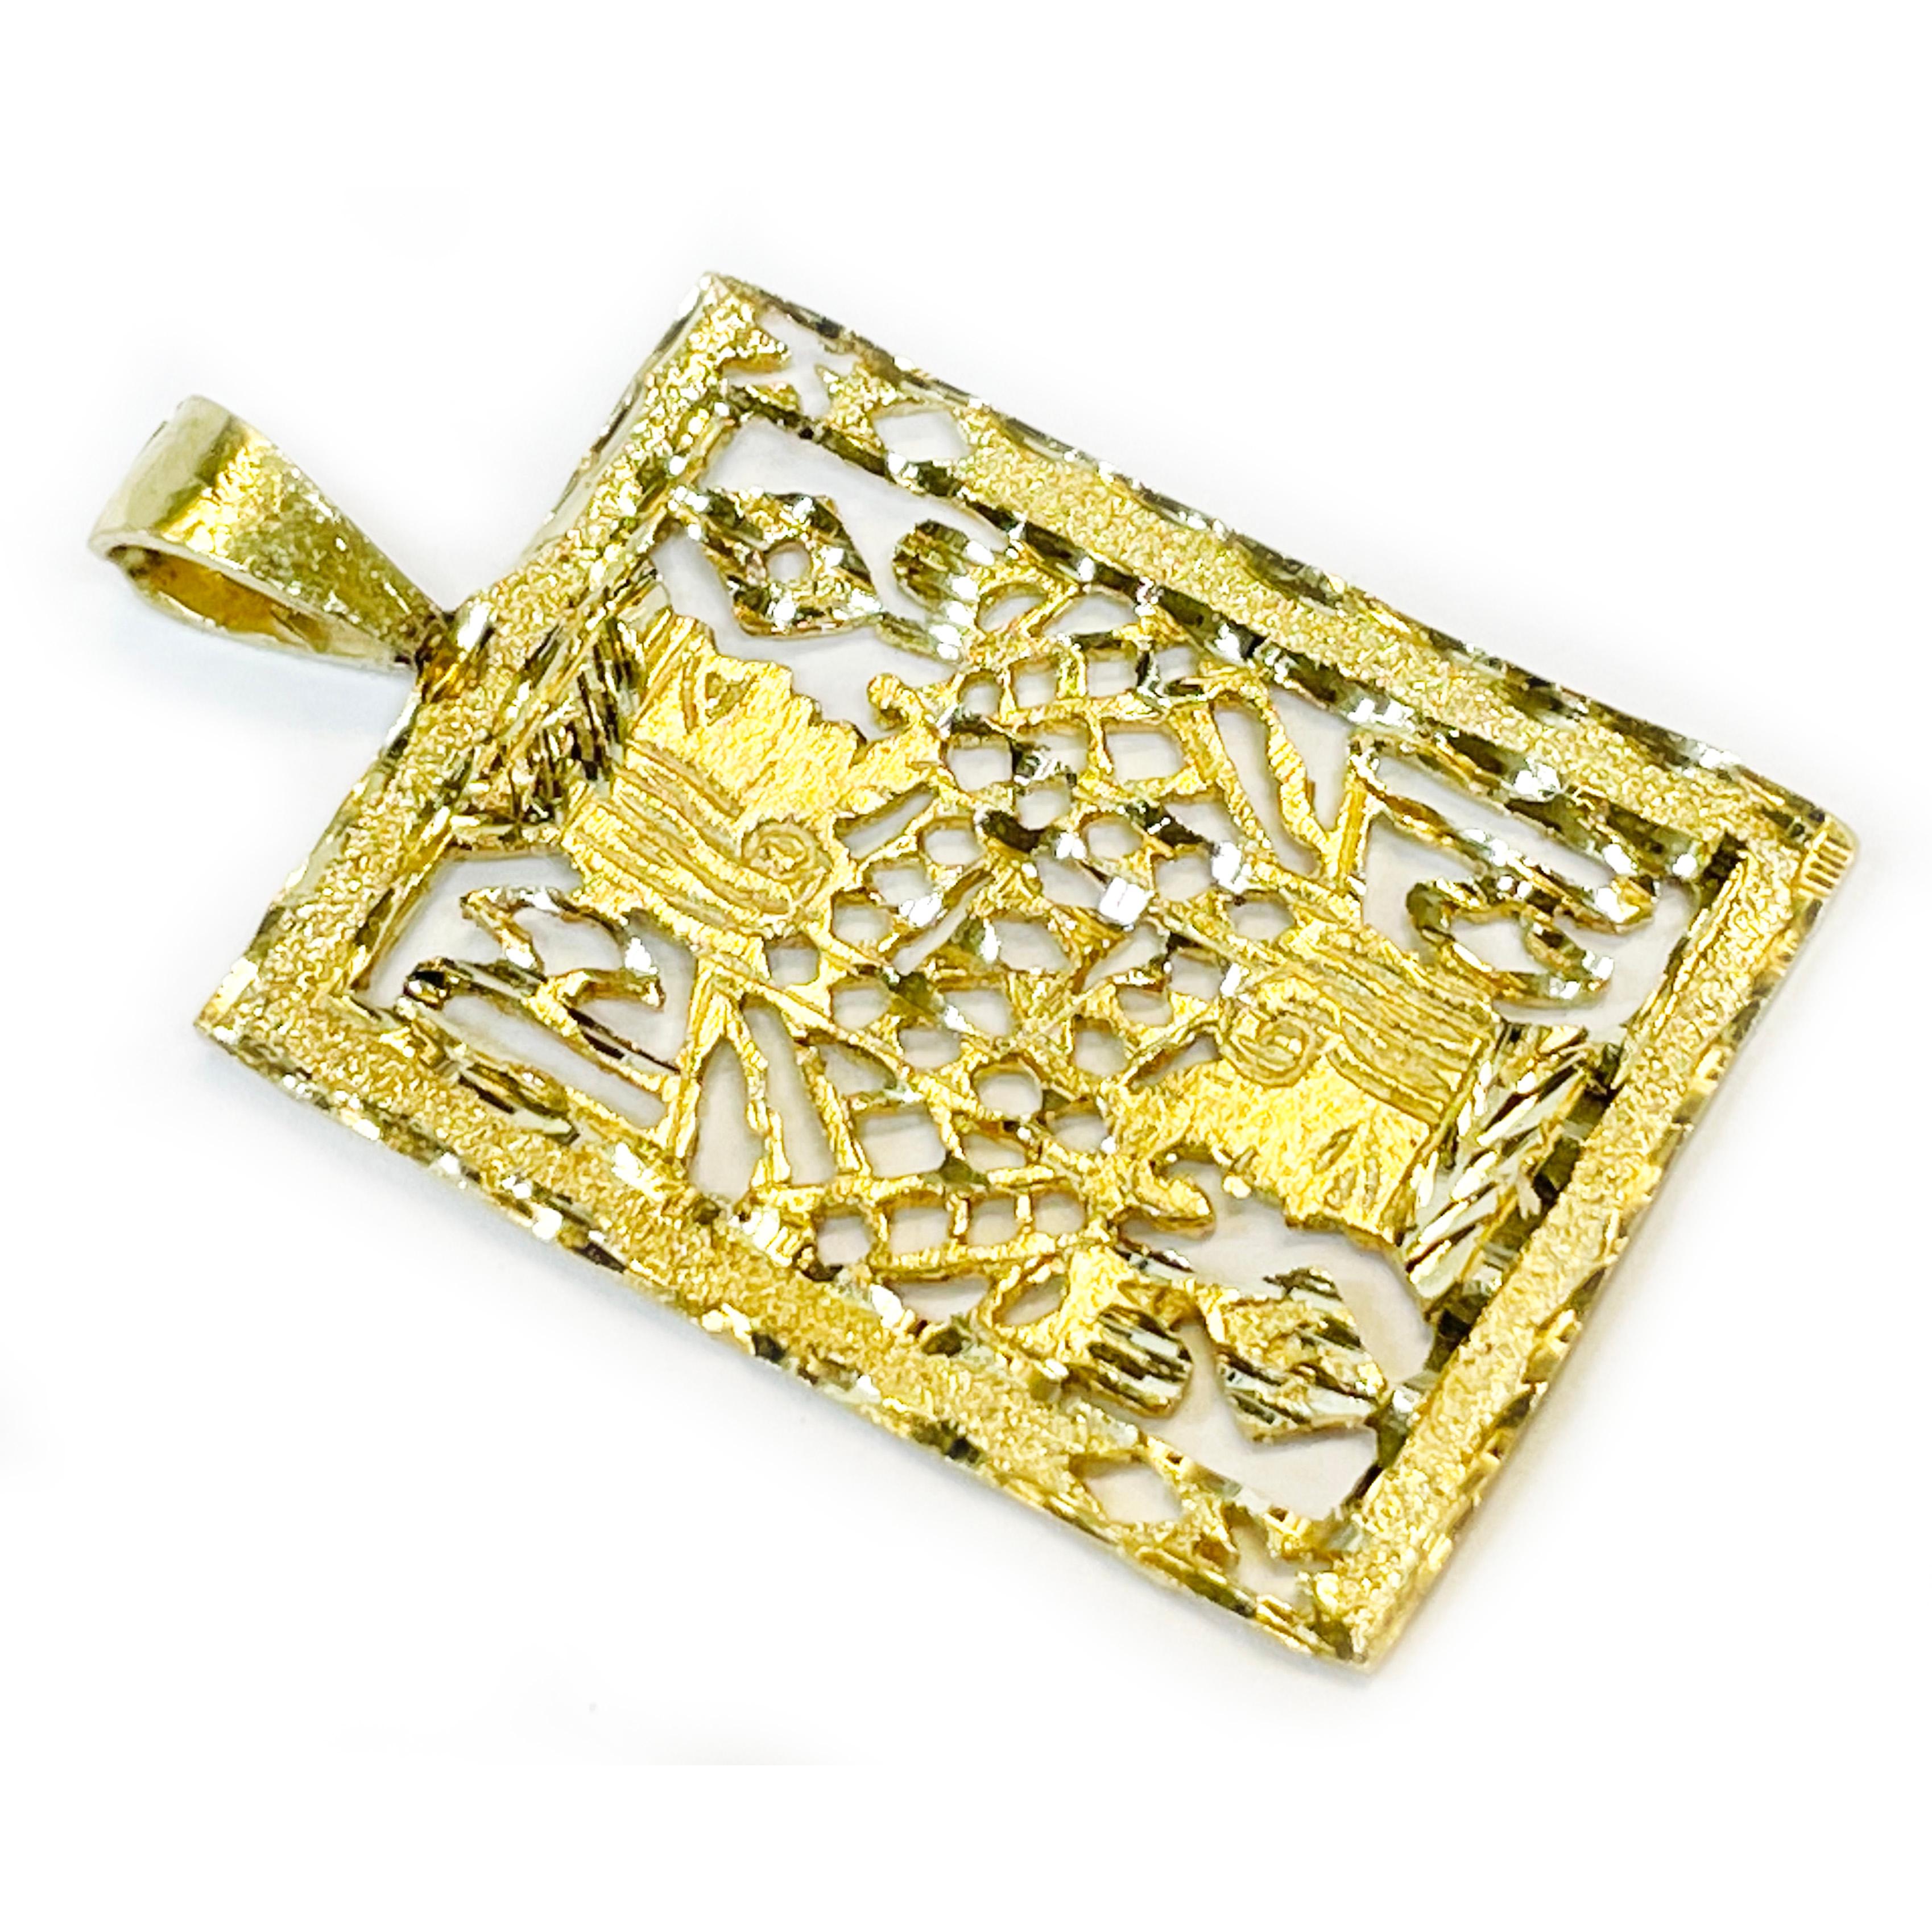 14 Karat Yellow Gold King Playing Card Pendant. The pendant features diamond cut and textured detail of King of Diamonds playing card. The diamond cut detail extends to the back of the pendant too. The pendant measures 1.57